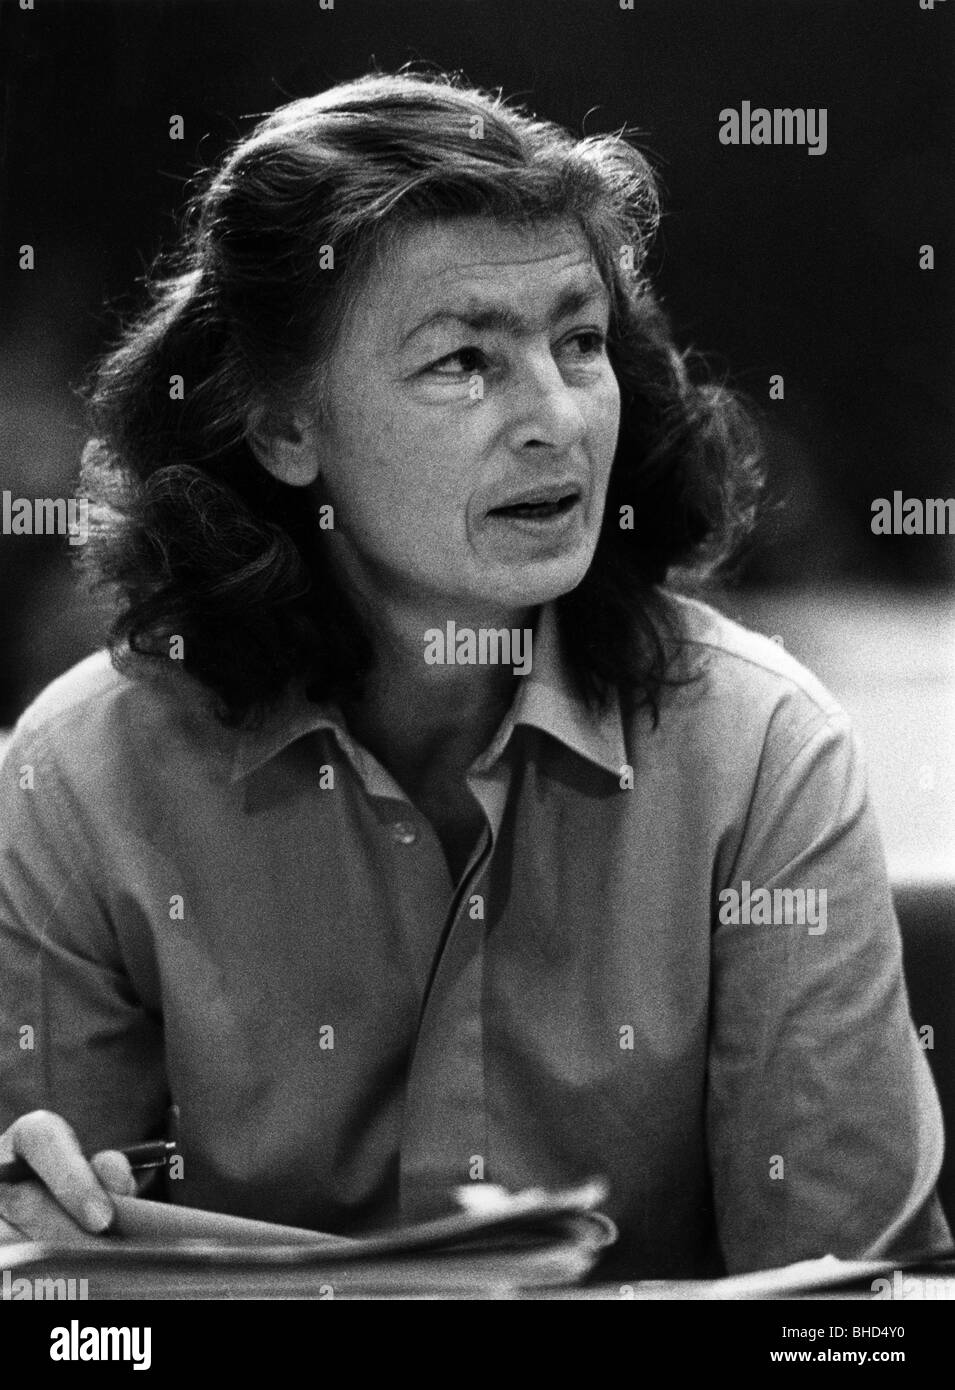 Griesebach, Marion Manon, German politician, portrait, federal party conference of The Greens, 7.-9.12.1984, Hamburg, , Stock Photo